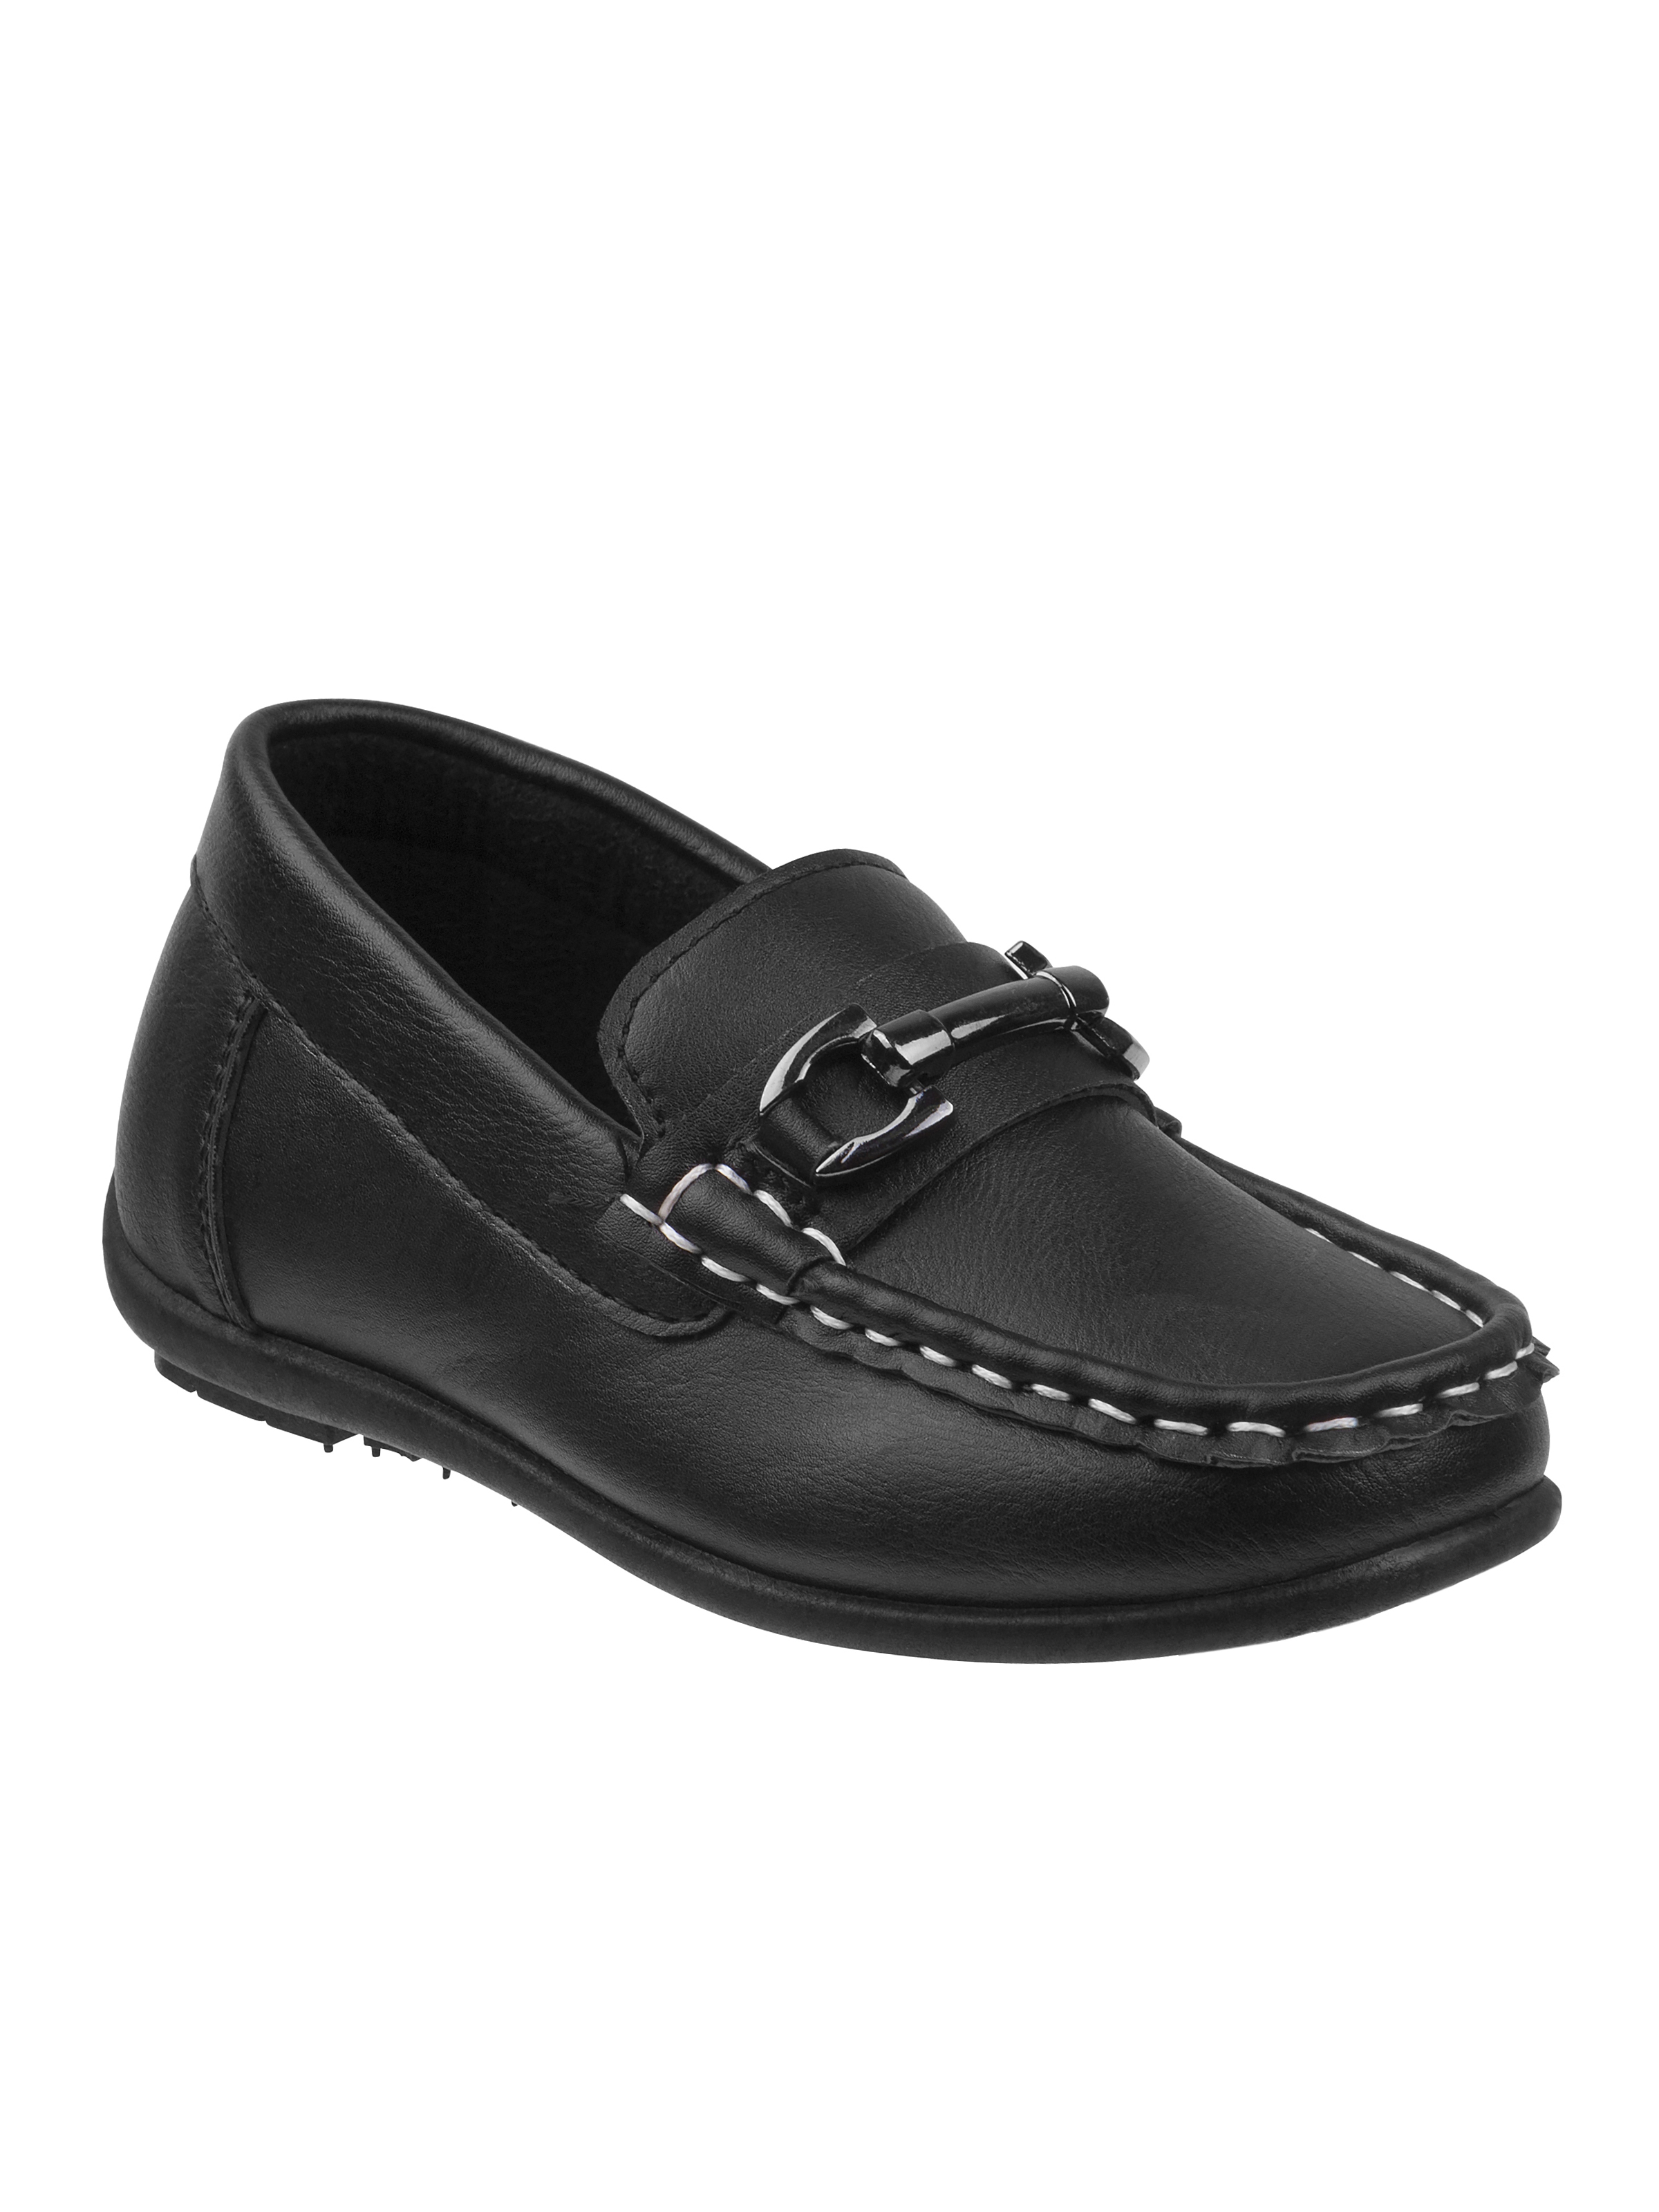 Josmo Boys Slip On Casual Shoes. (Toddler/Little Kids) - image 1 of 5